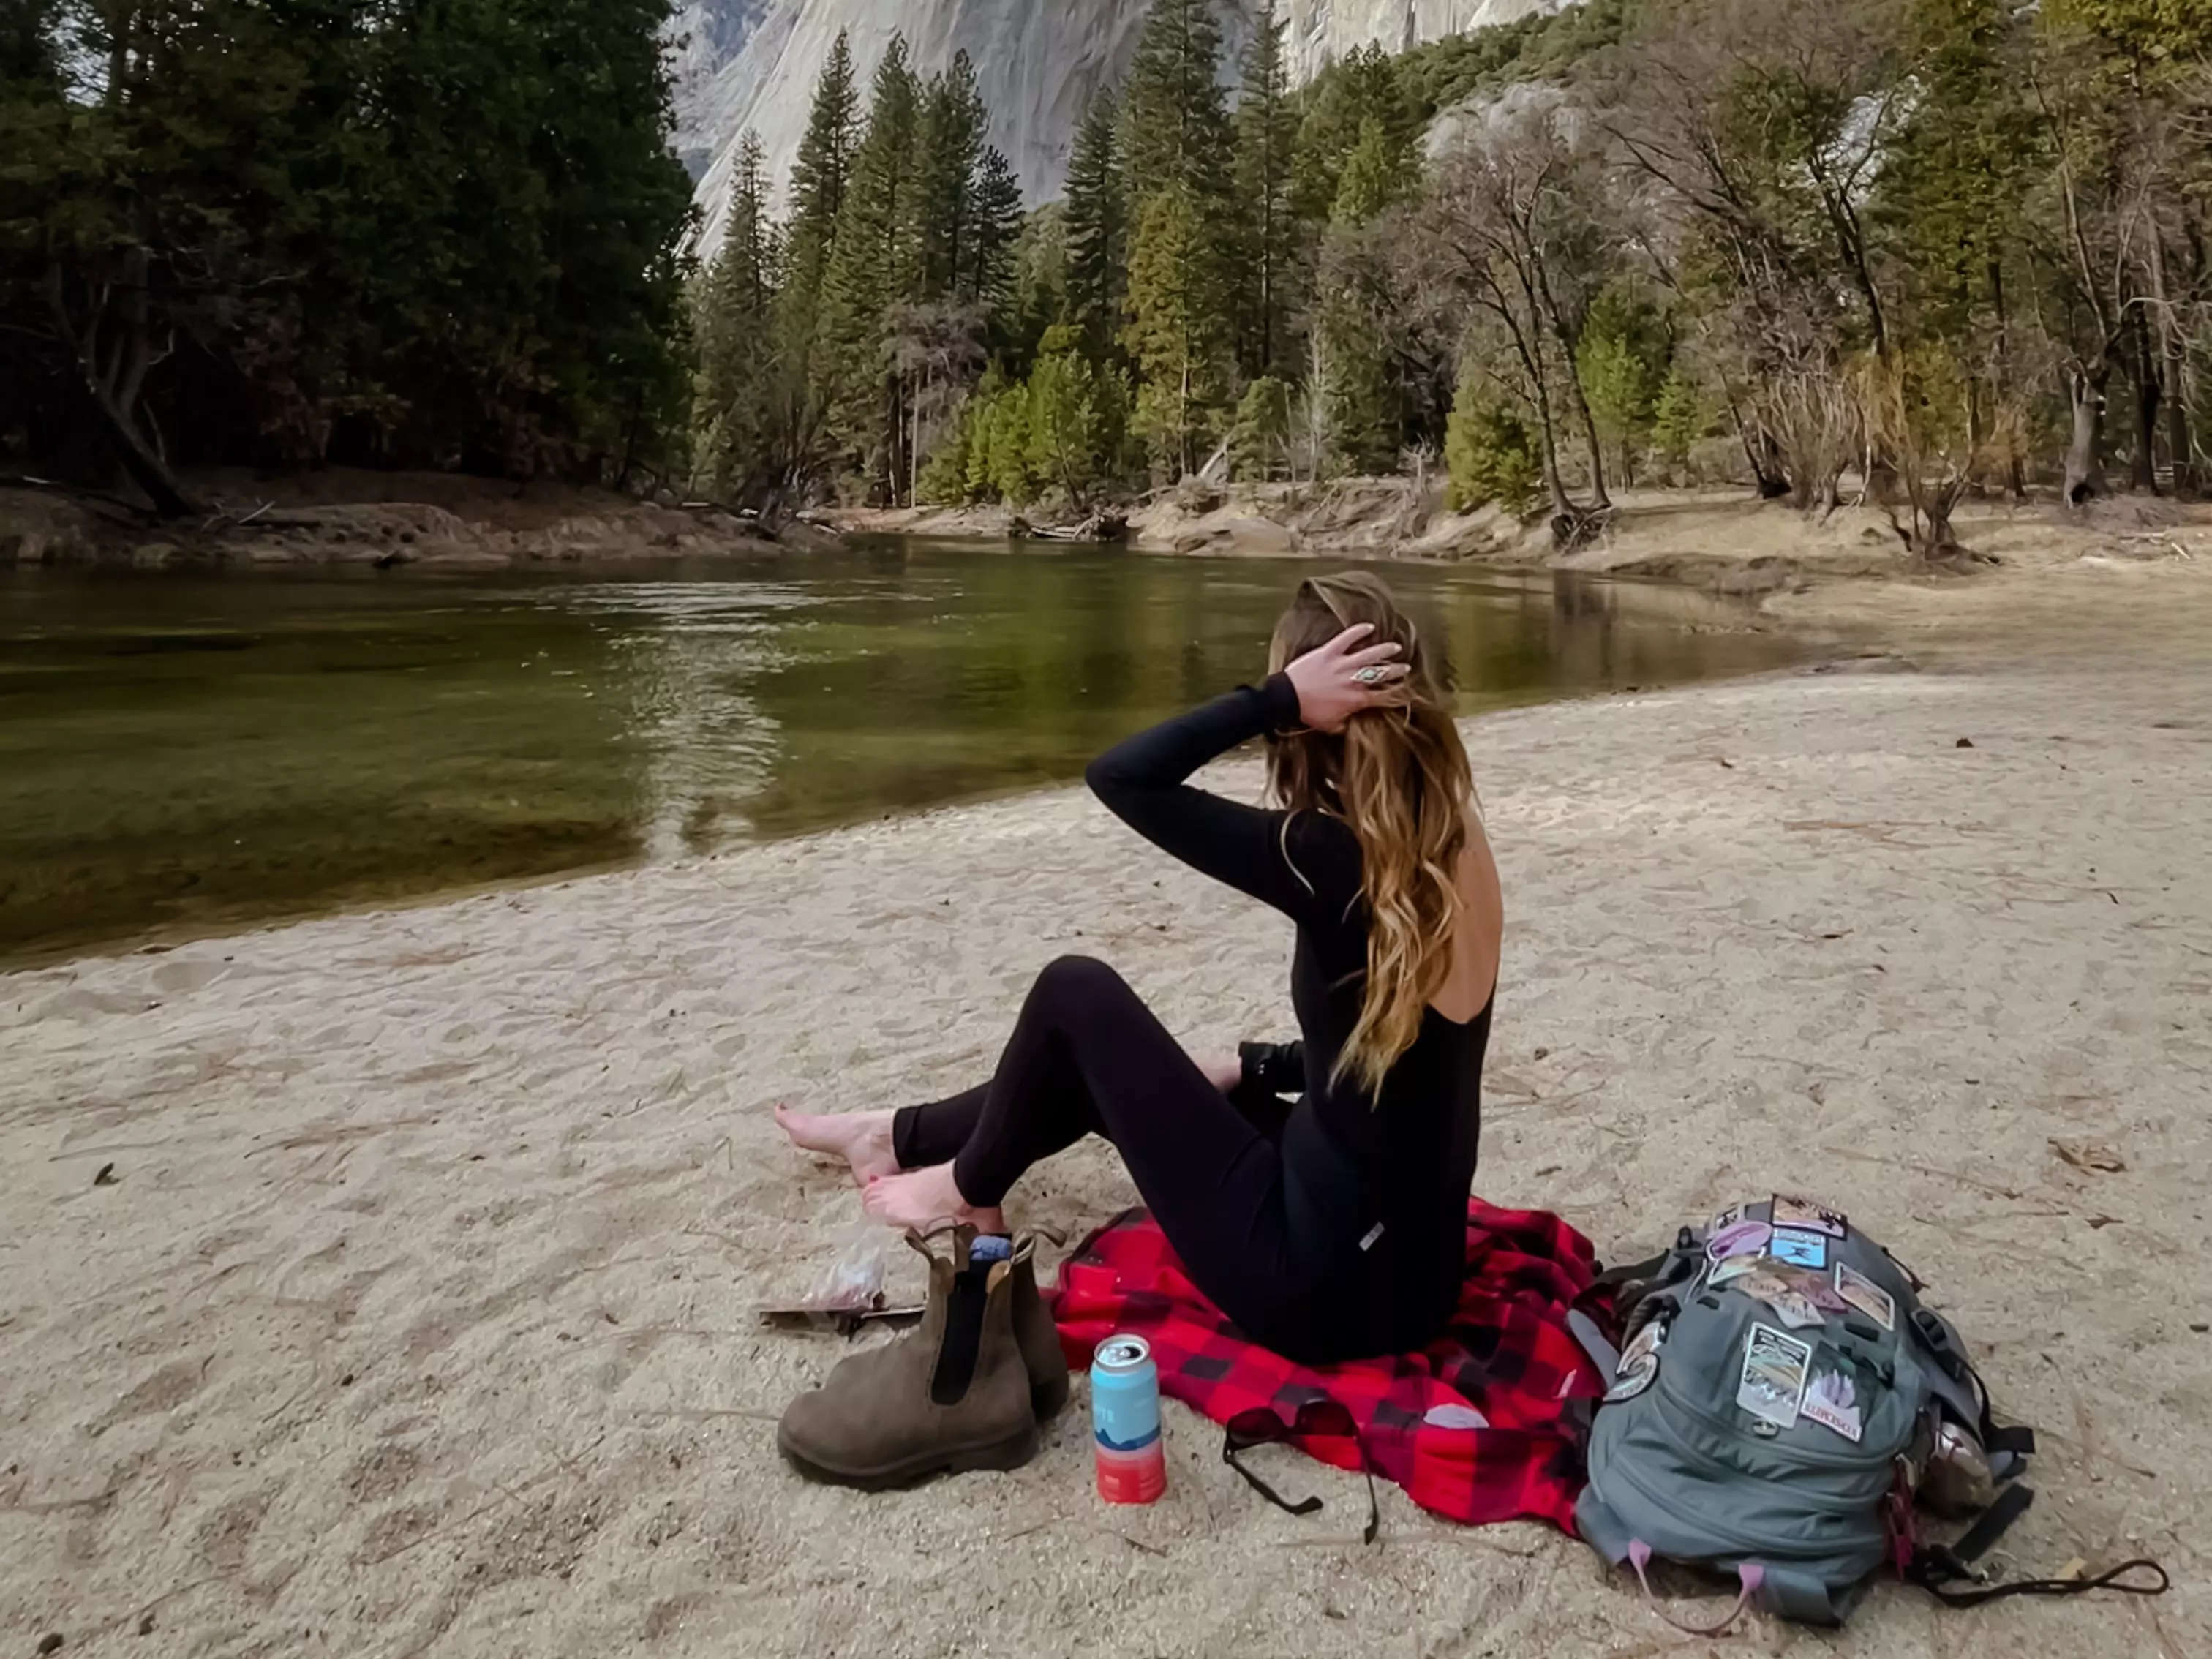 Emily sits on a black-and-red-checkered flannel looking out at water, trees, and mountains. Surrounding her are her sunglasses, boots, sunglasses, and a backpack covered with patches.